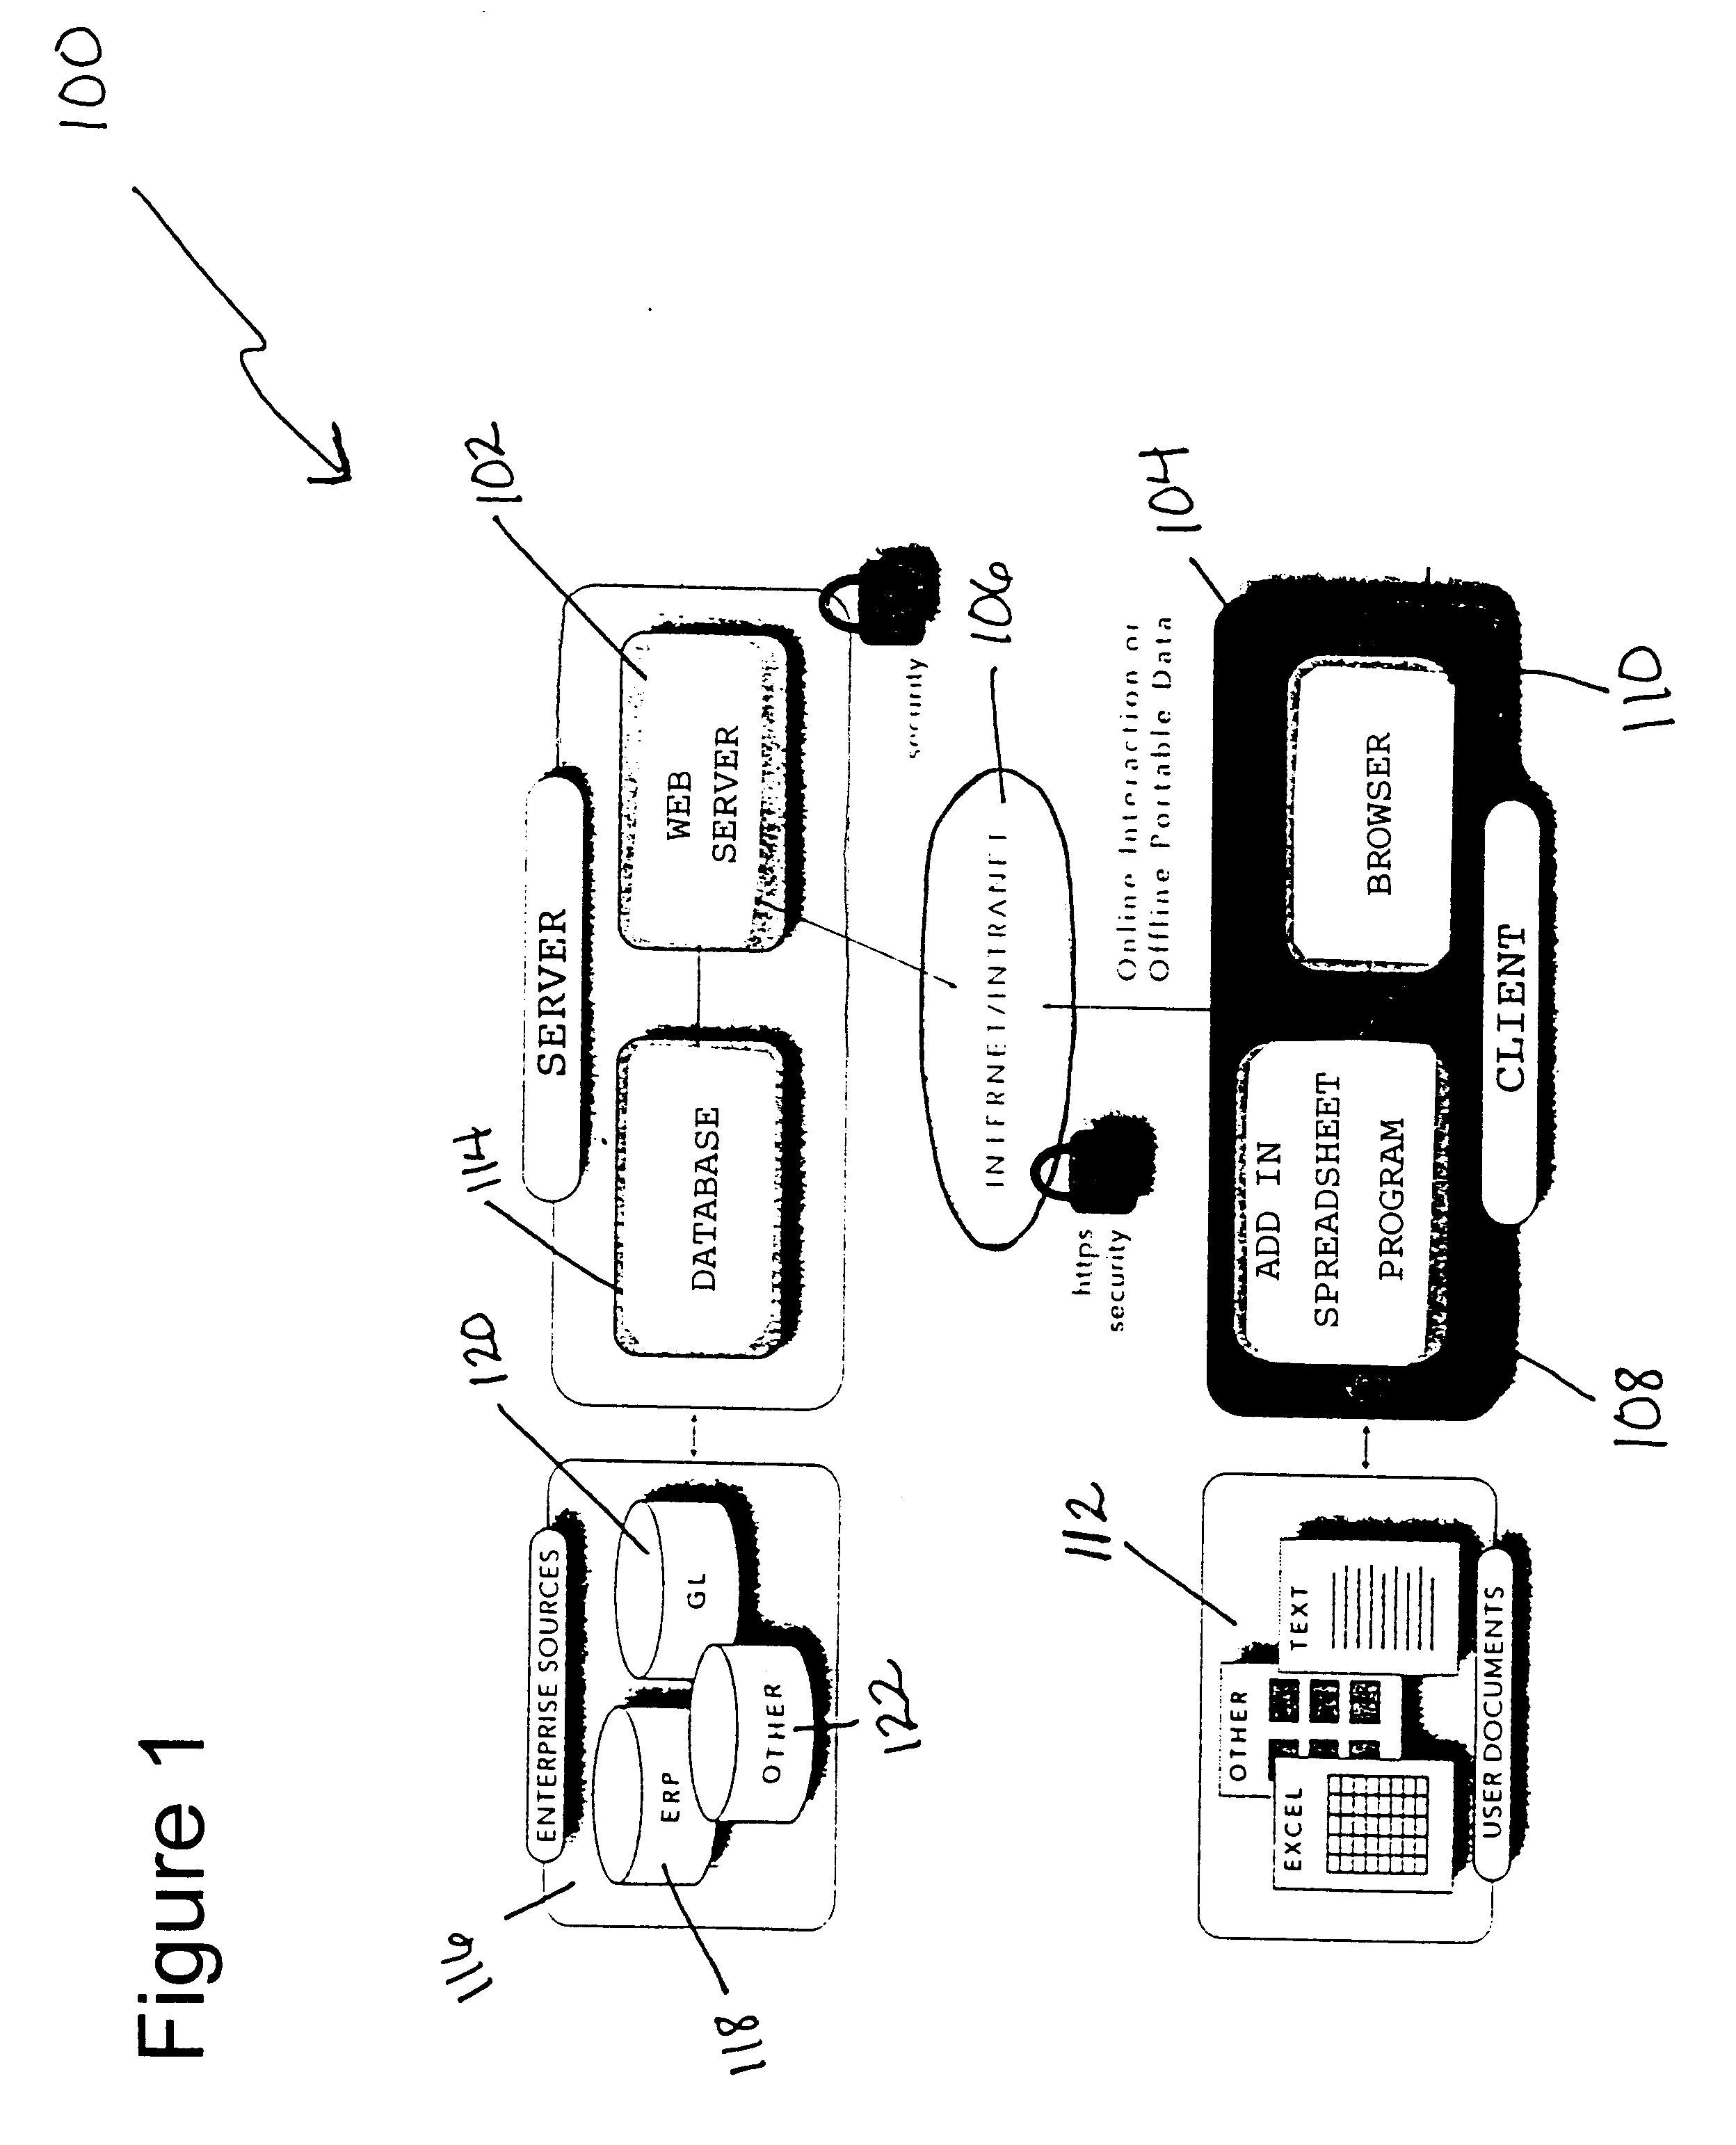 Spreadsheet-based network information exchange with two-part cache